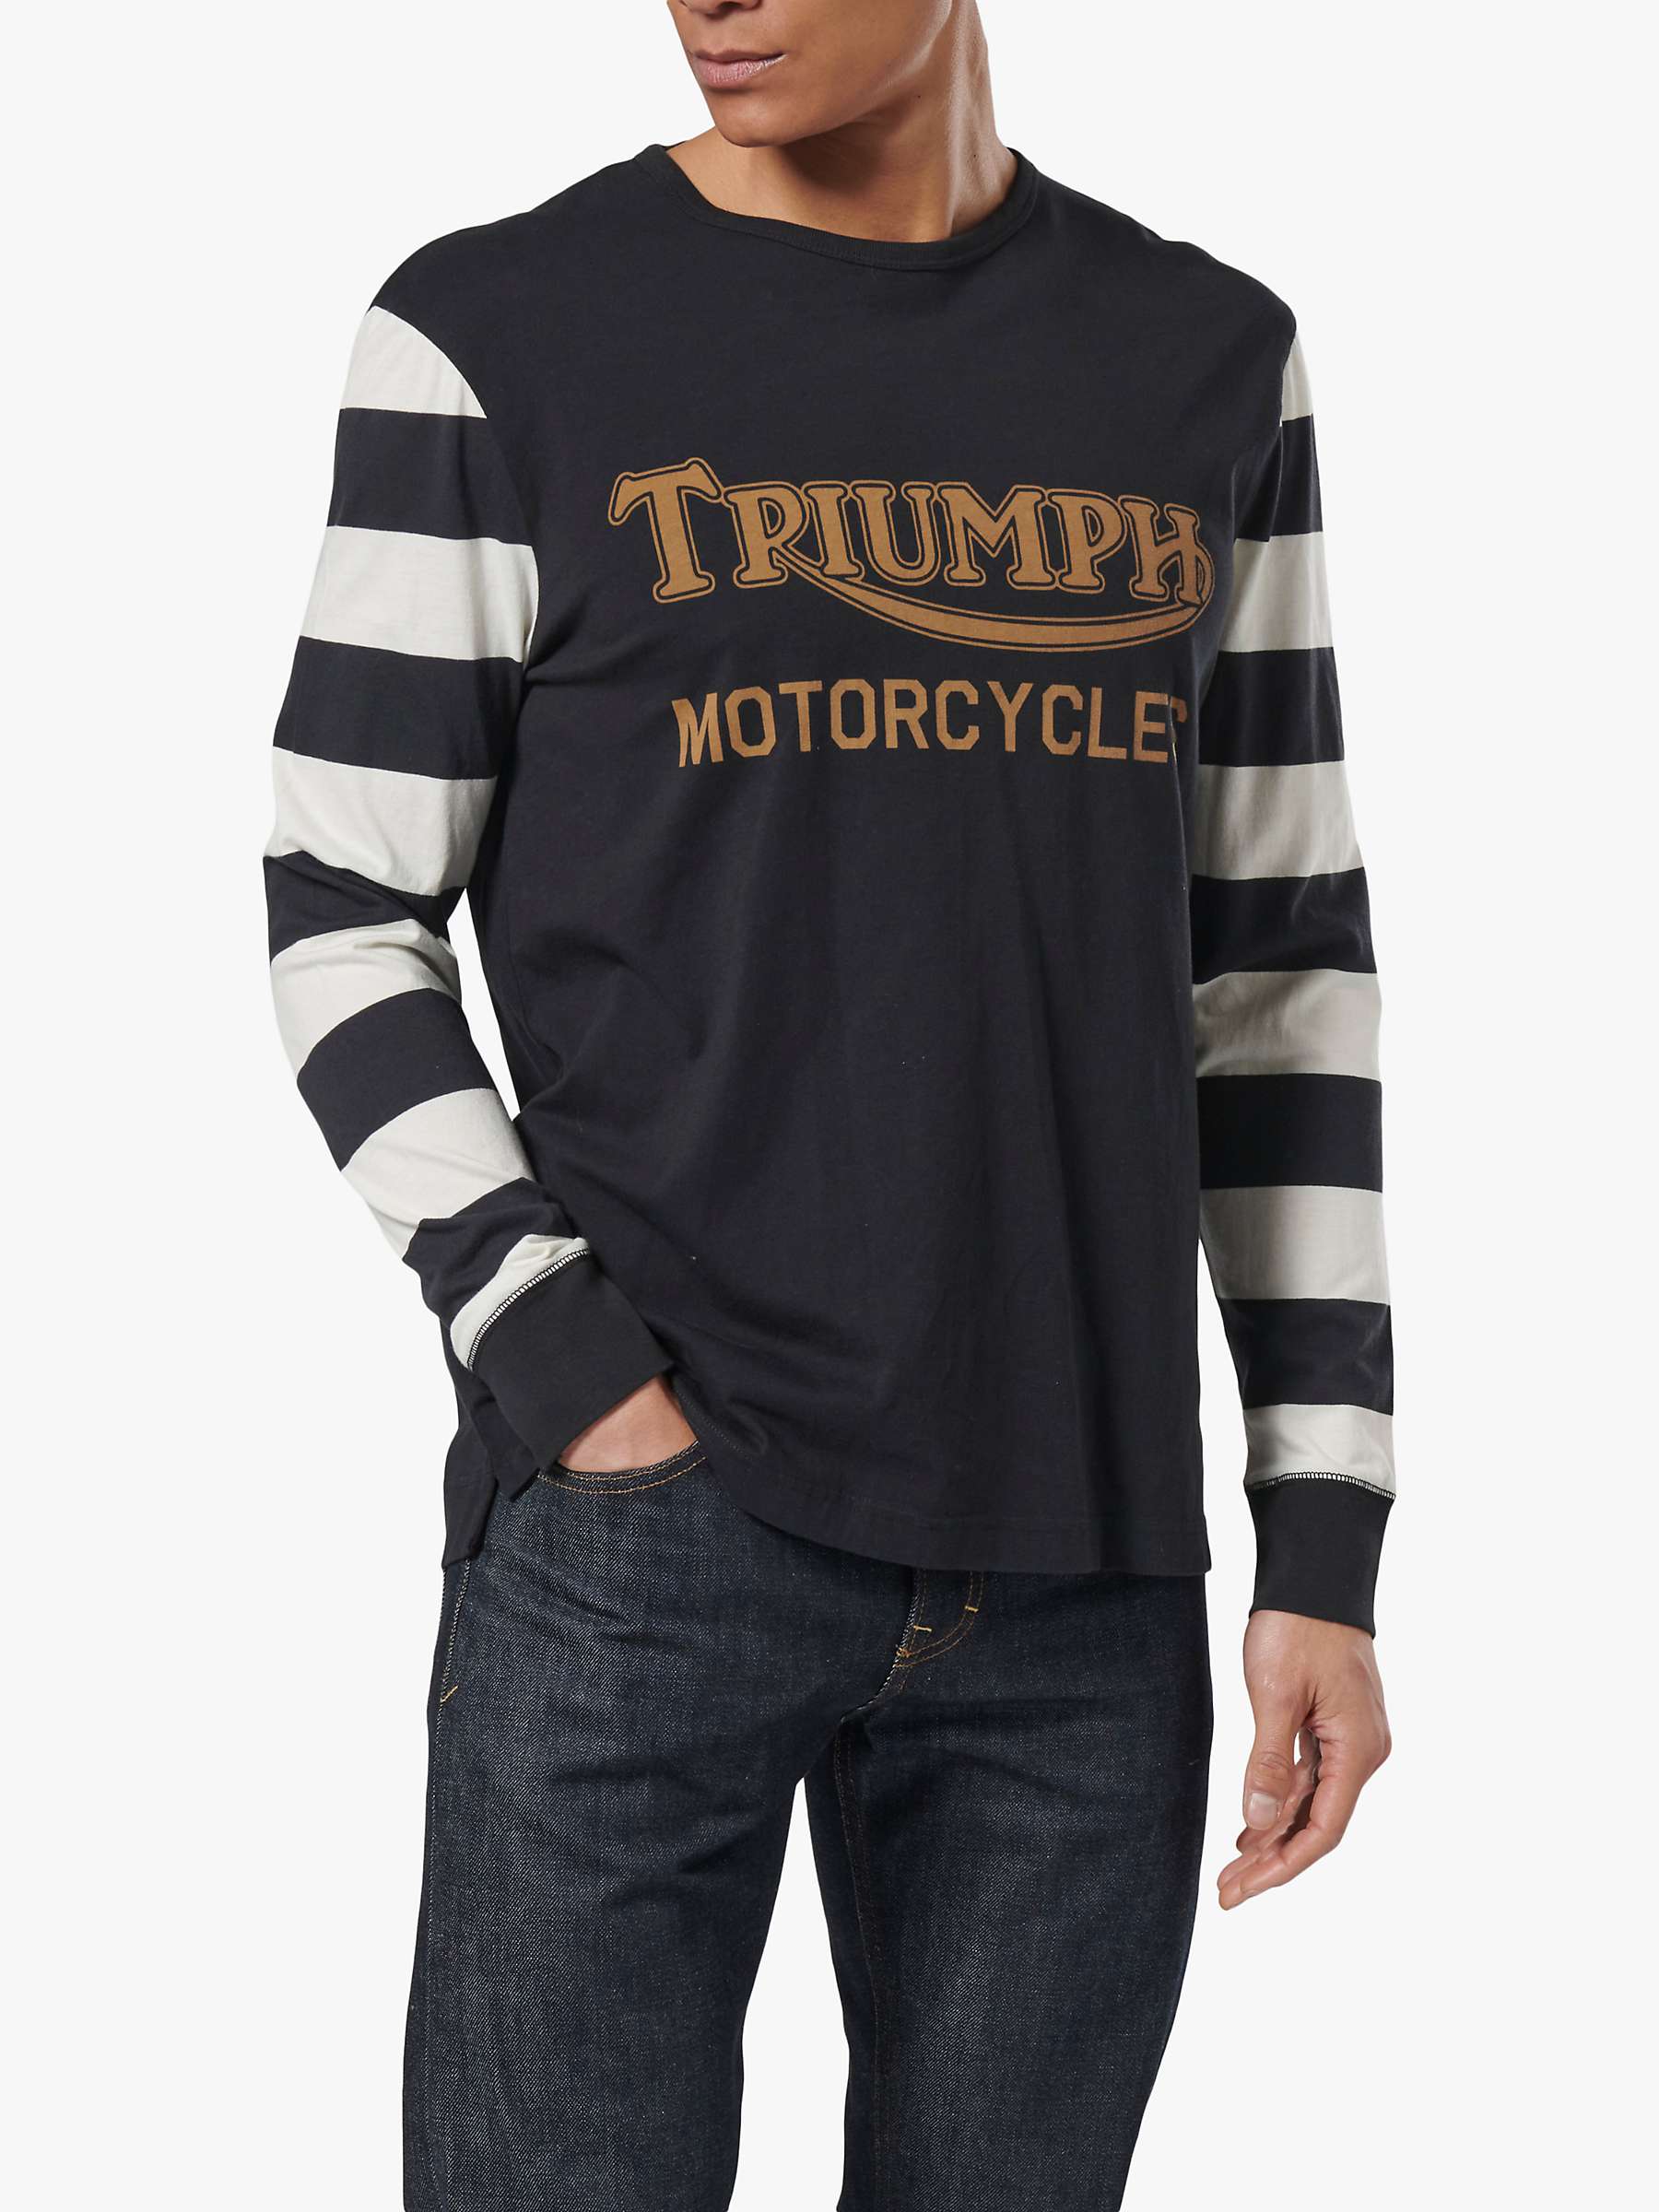 Buy Triumph Motorcycles Ignition Long Sleeve T-Shirt Online at johnlewis.com